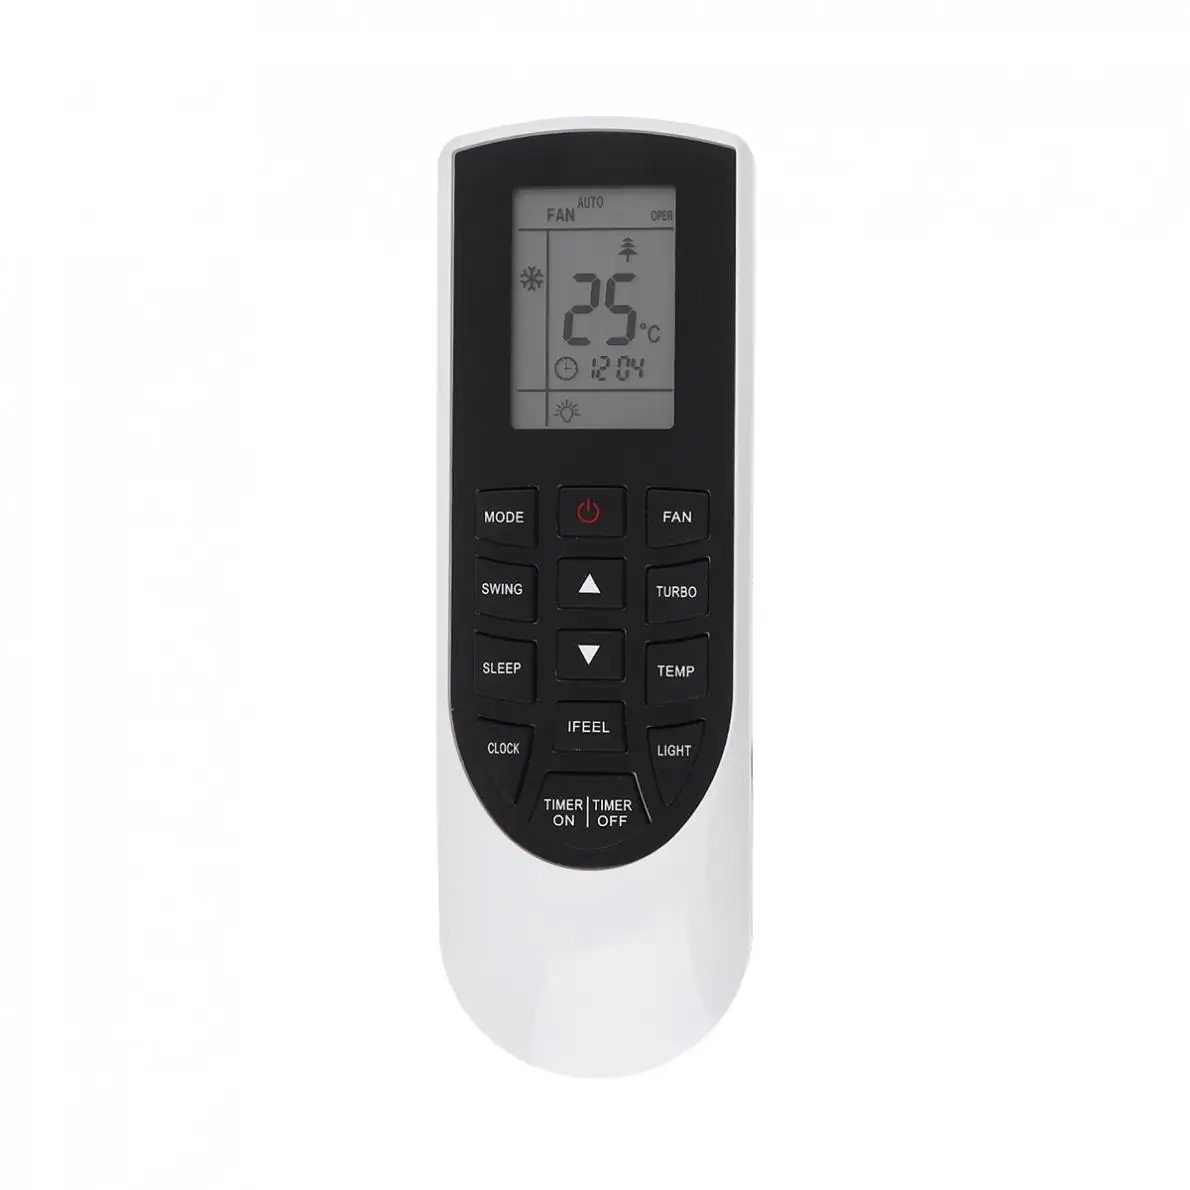 

IR 433 MHz Air Conditioner Remote Control Replacement with akira Remote Control Distance fit for GRE YAN1F1 AC Fernbedienung